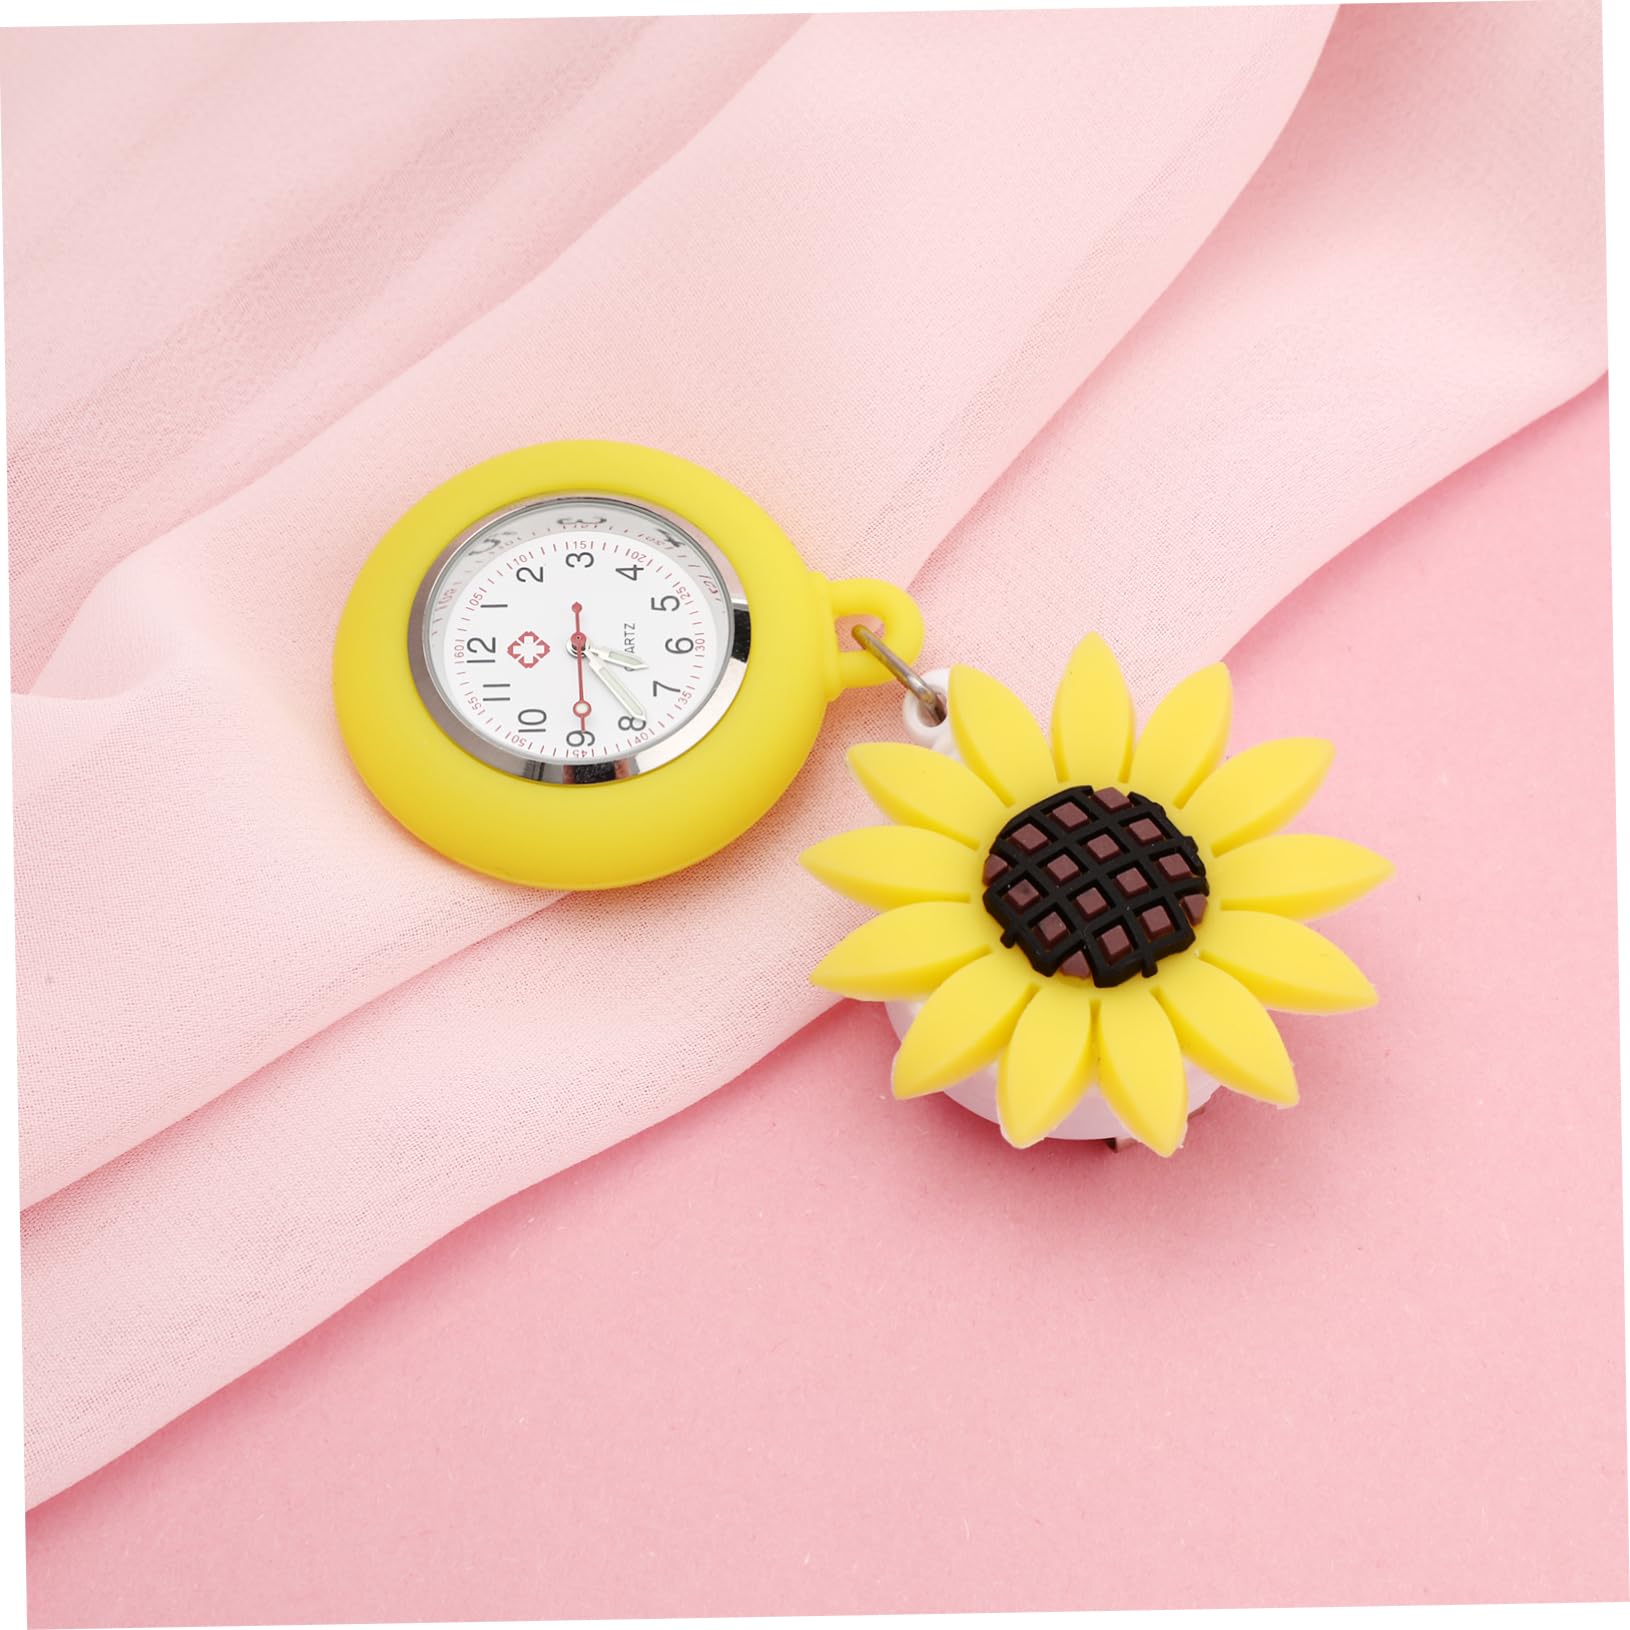 BESTOYARD 2 Pcs Sunflower Form Sunflower Watch Gifts for Men Watches for Women Watch for Nurses Watch with Silicone Cover Miss Buckle Necessity Soft Silicone